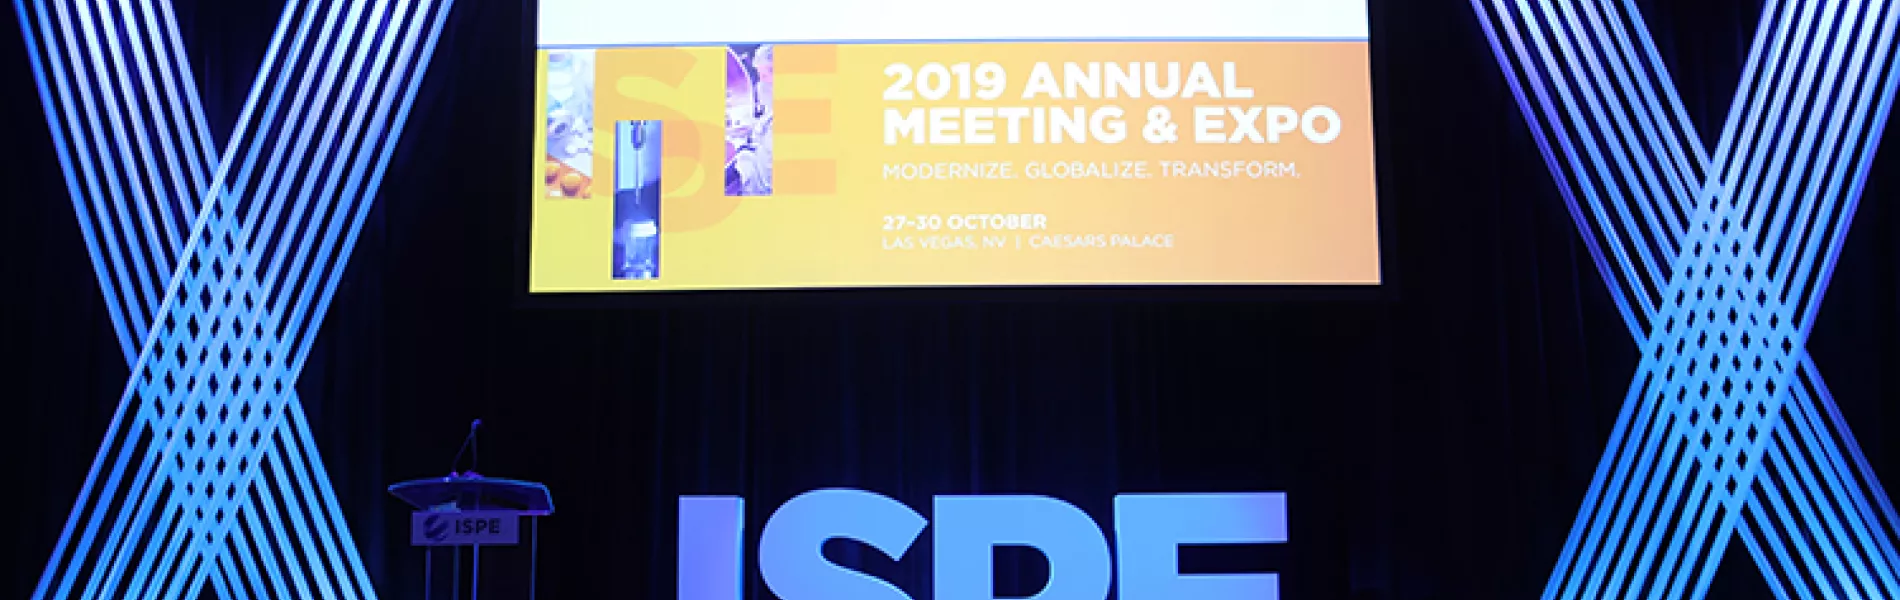 Special Report: 2019 ISPE Annual Meeting & Expo